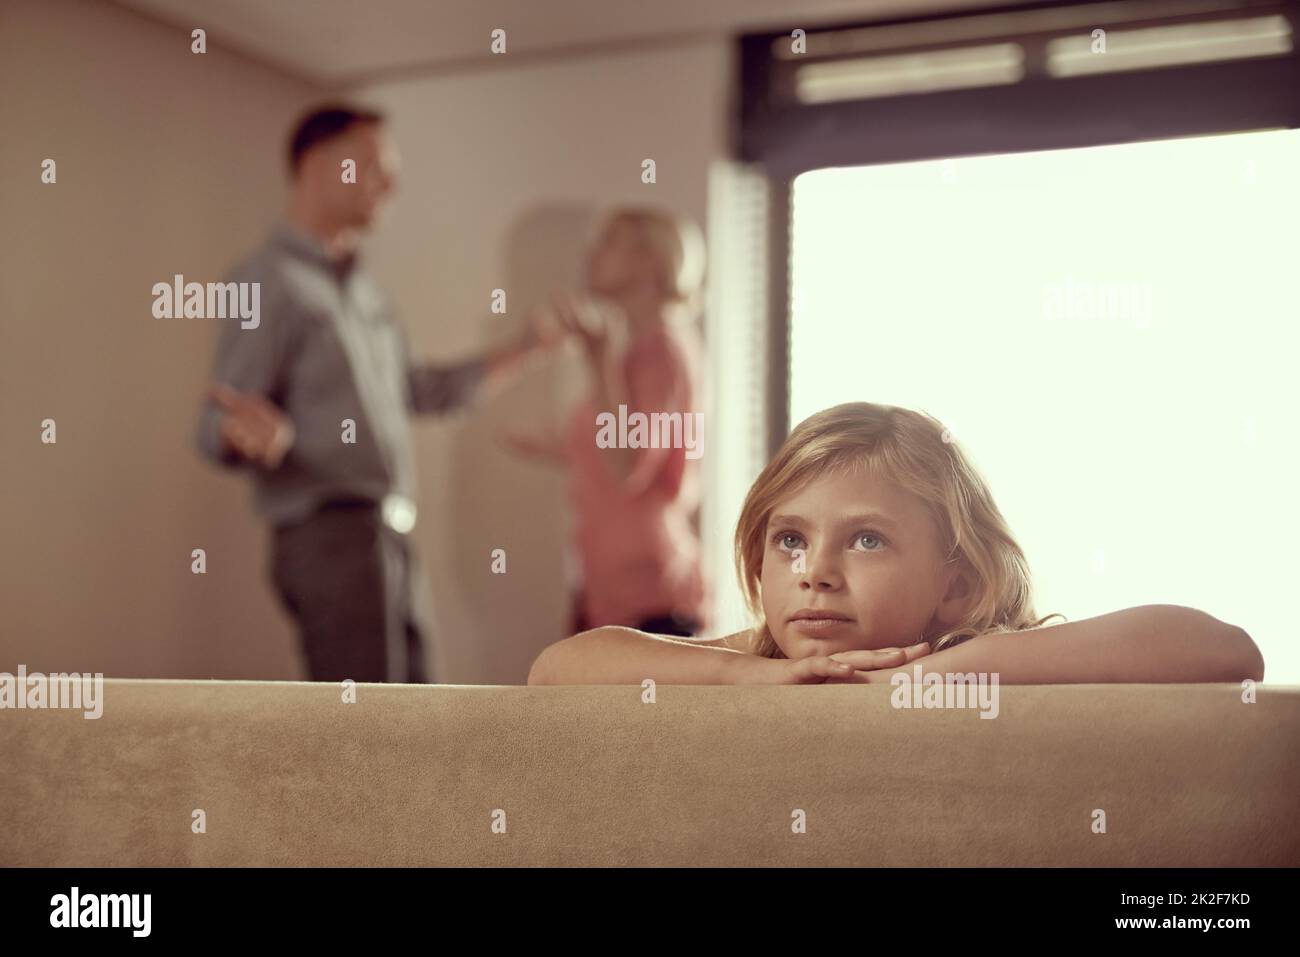 Why do they have to fight. Shot of a little girl looking unhappy as her parents argue in the background. Stock Photo